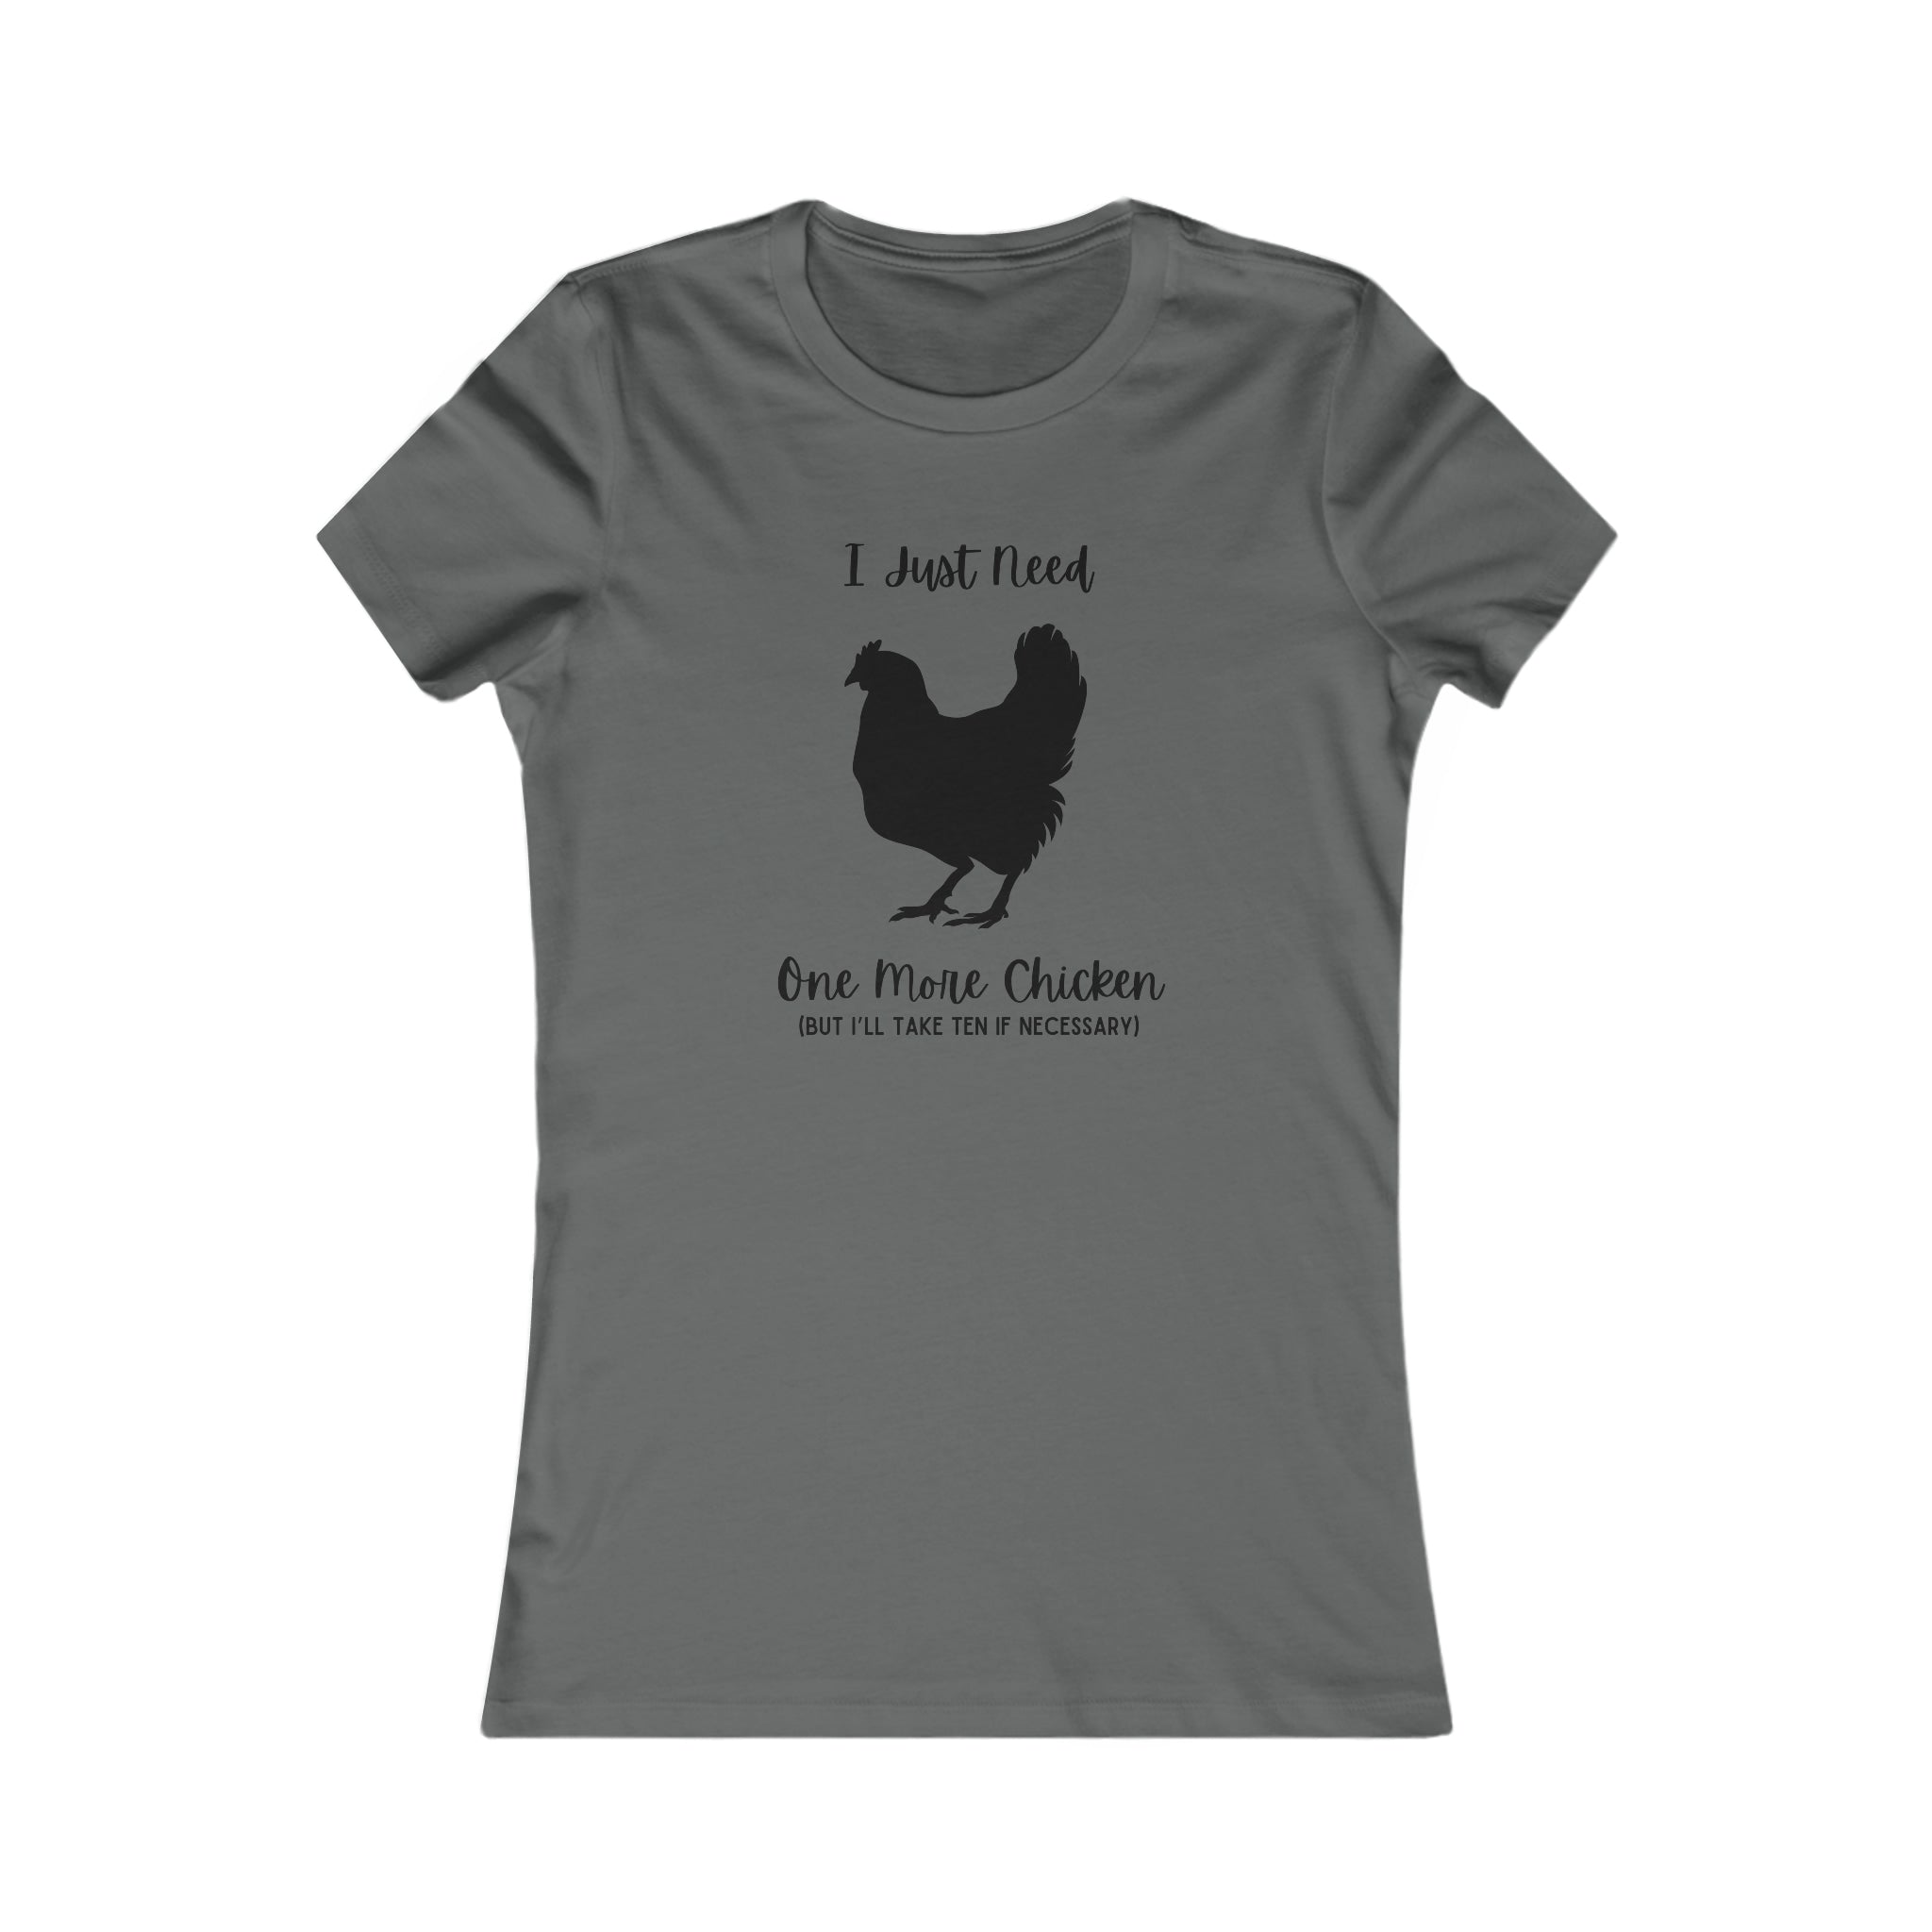 Grey shirt with a chicken silhouette and phrase I just need one more chicken but I'll take ten if necessary